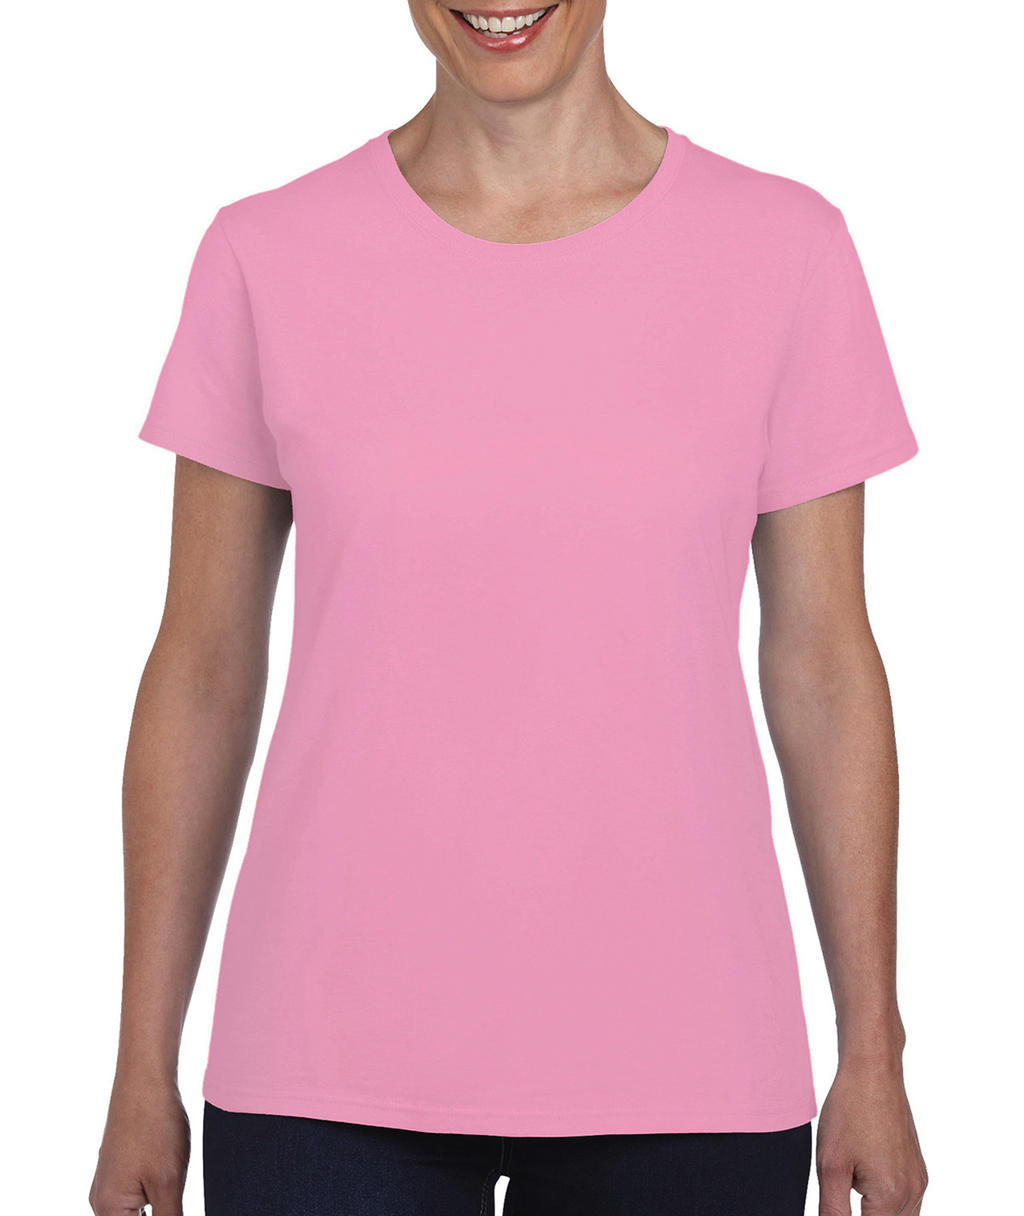  Ladies Heavy Cotton T-Shirt in Farbe Light Pink